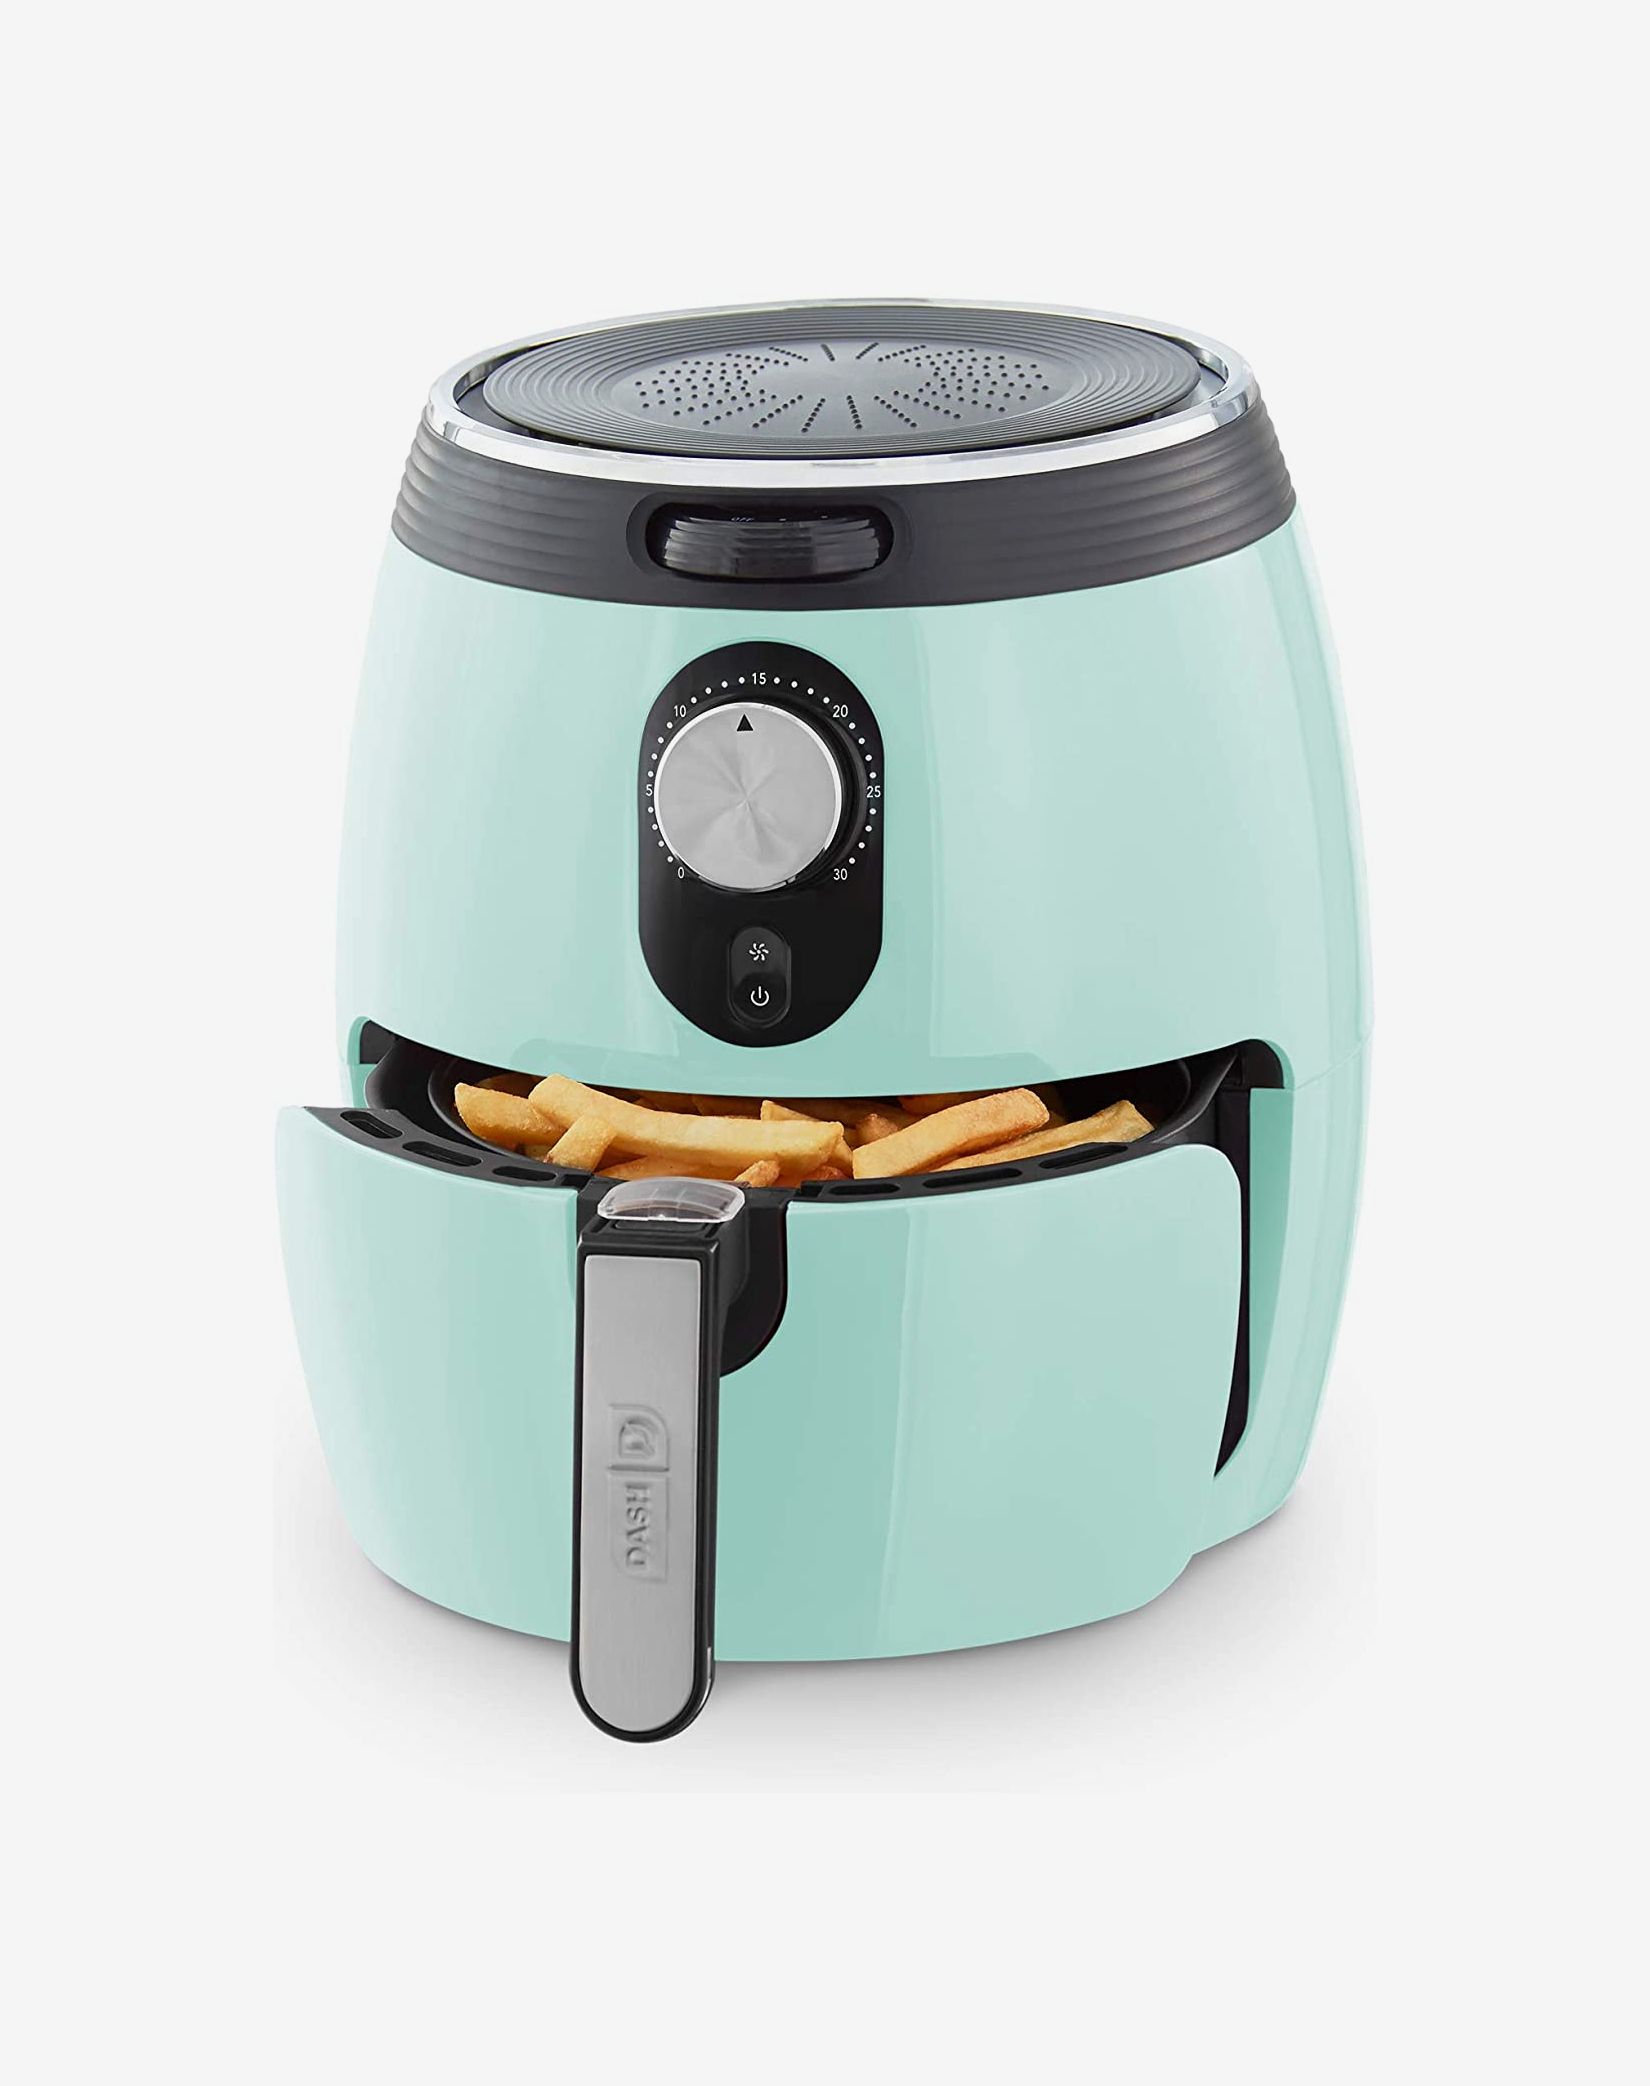 Prime Day 2020: The best kitchen gadgets, cooking tools and